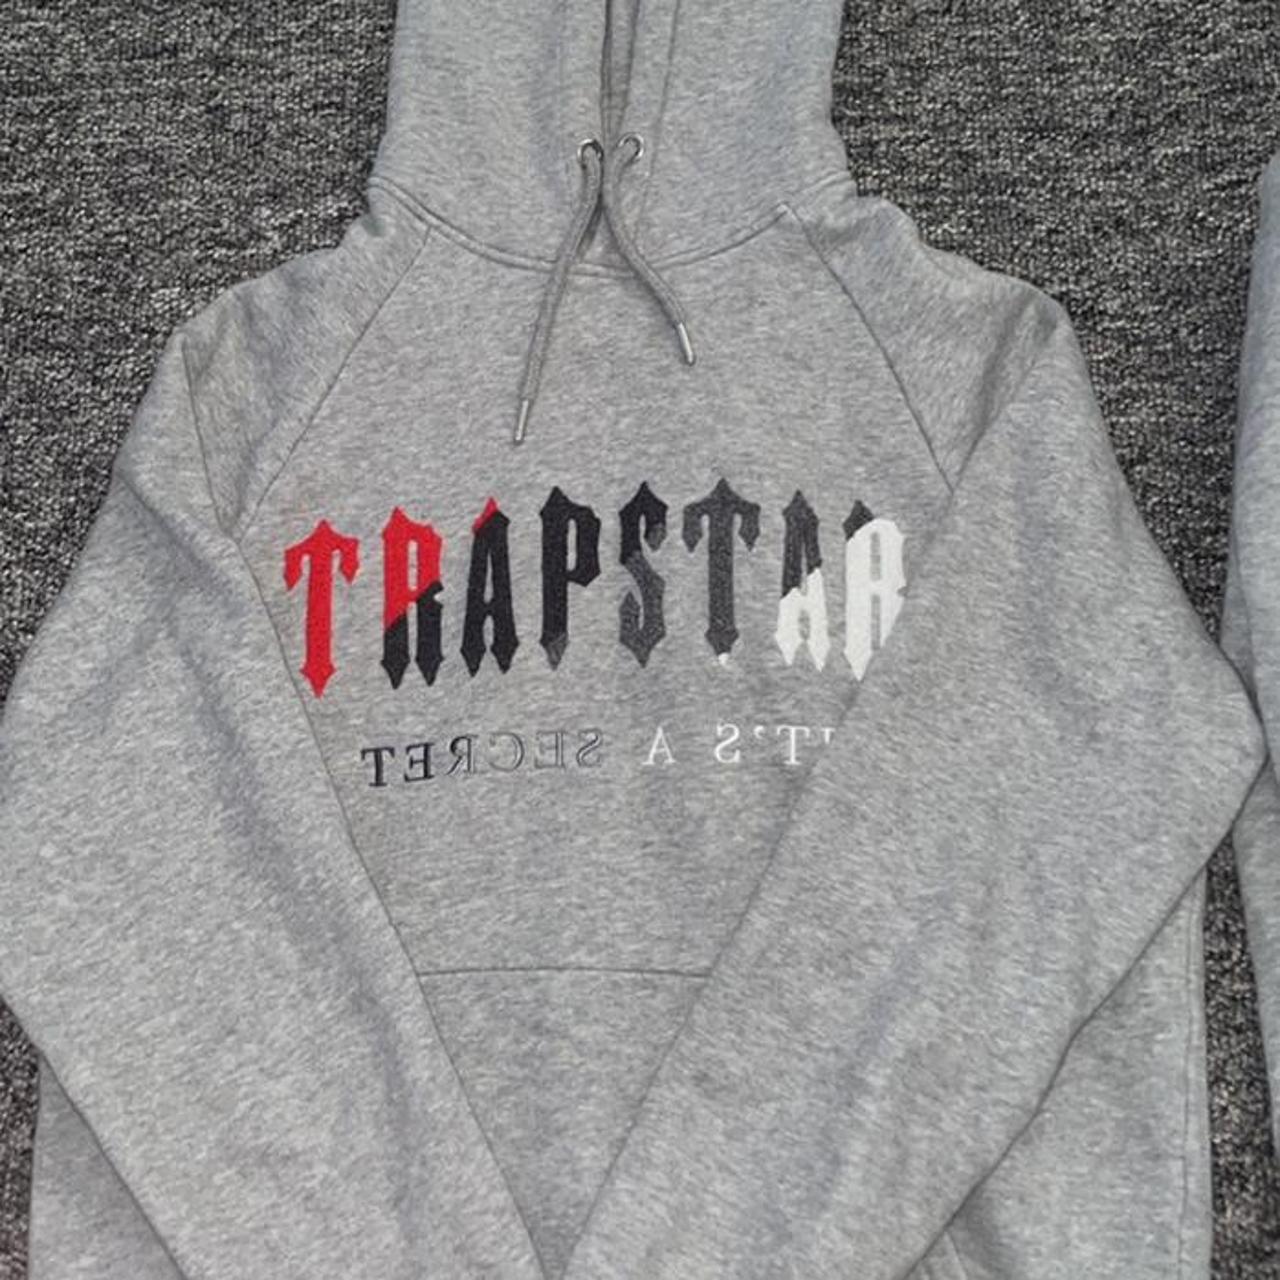 Trapstar Tracksuit Grey / Red